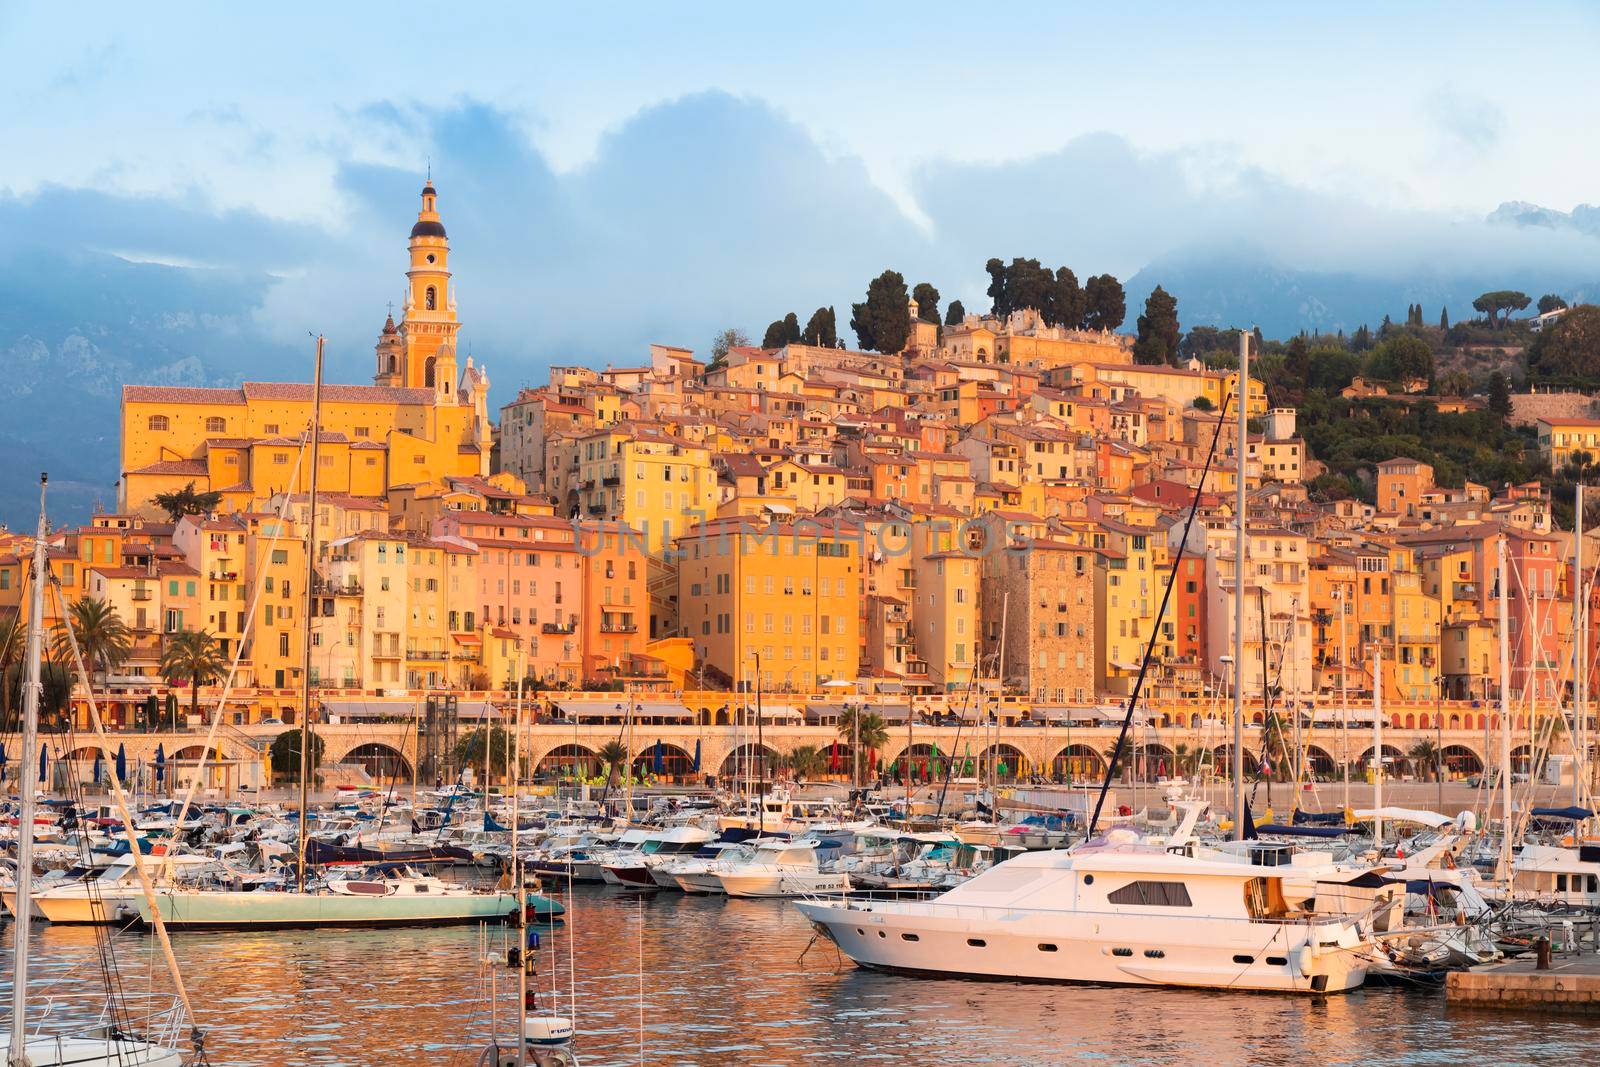 Menton on the French Riviera, named the Coast Azur, located in the South of France at sunrise by Perseomedusa